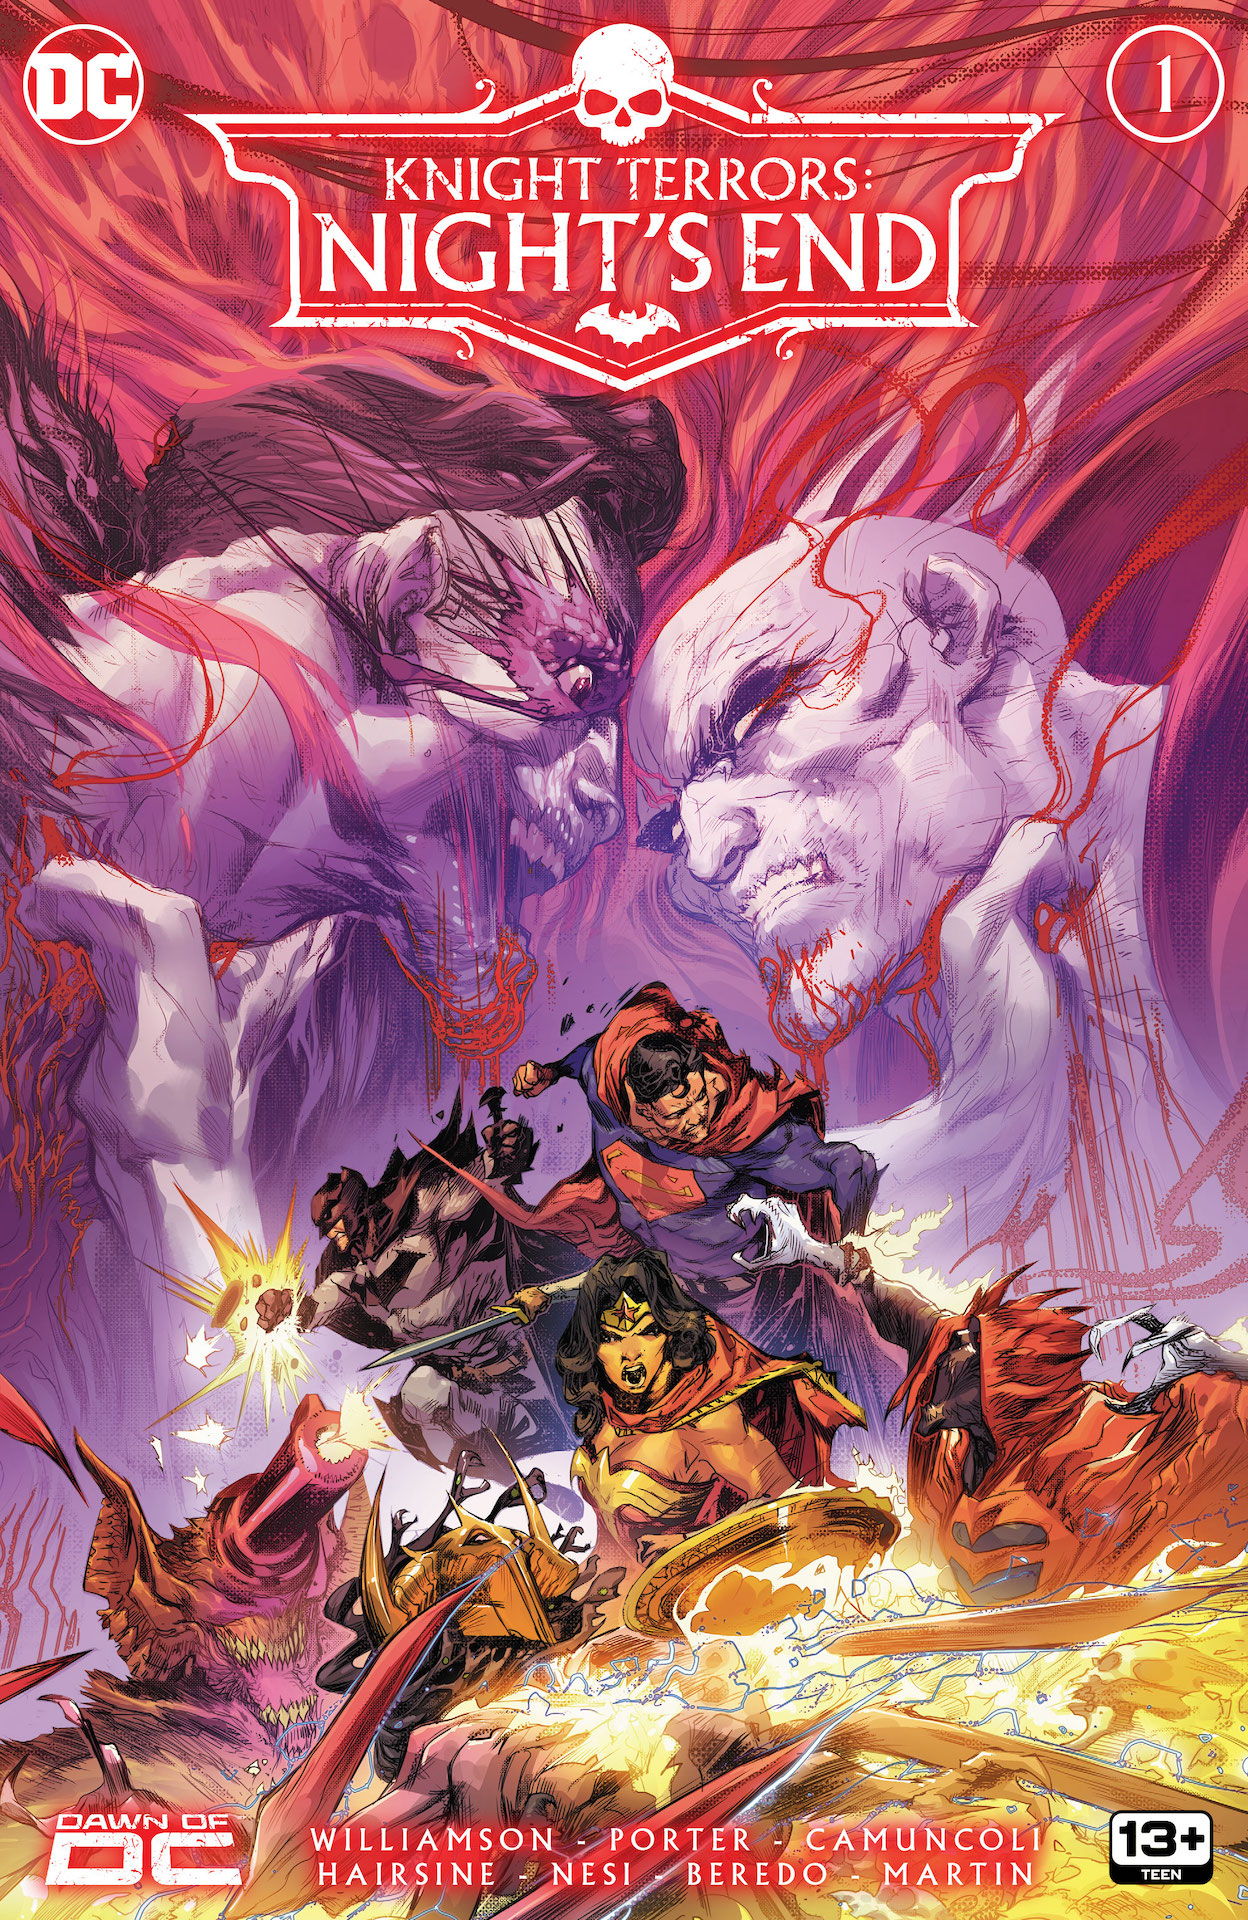 DC Preview: Knight Terrors: Night's End #1